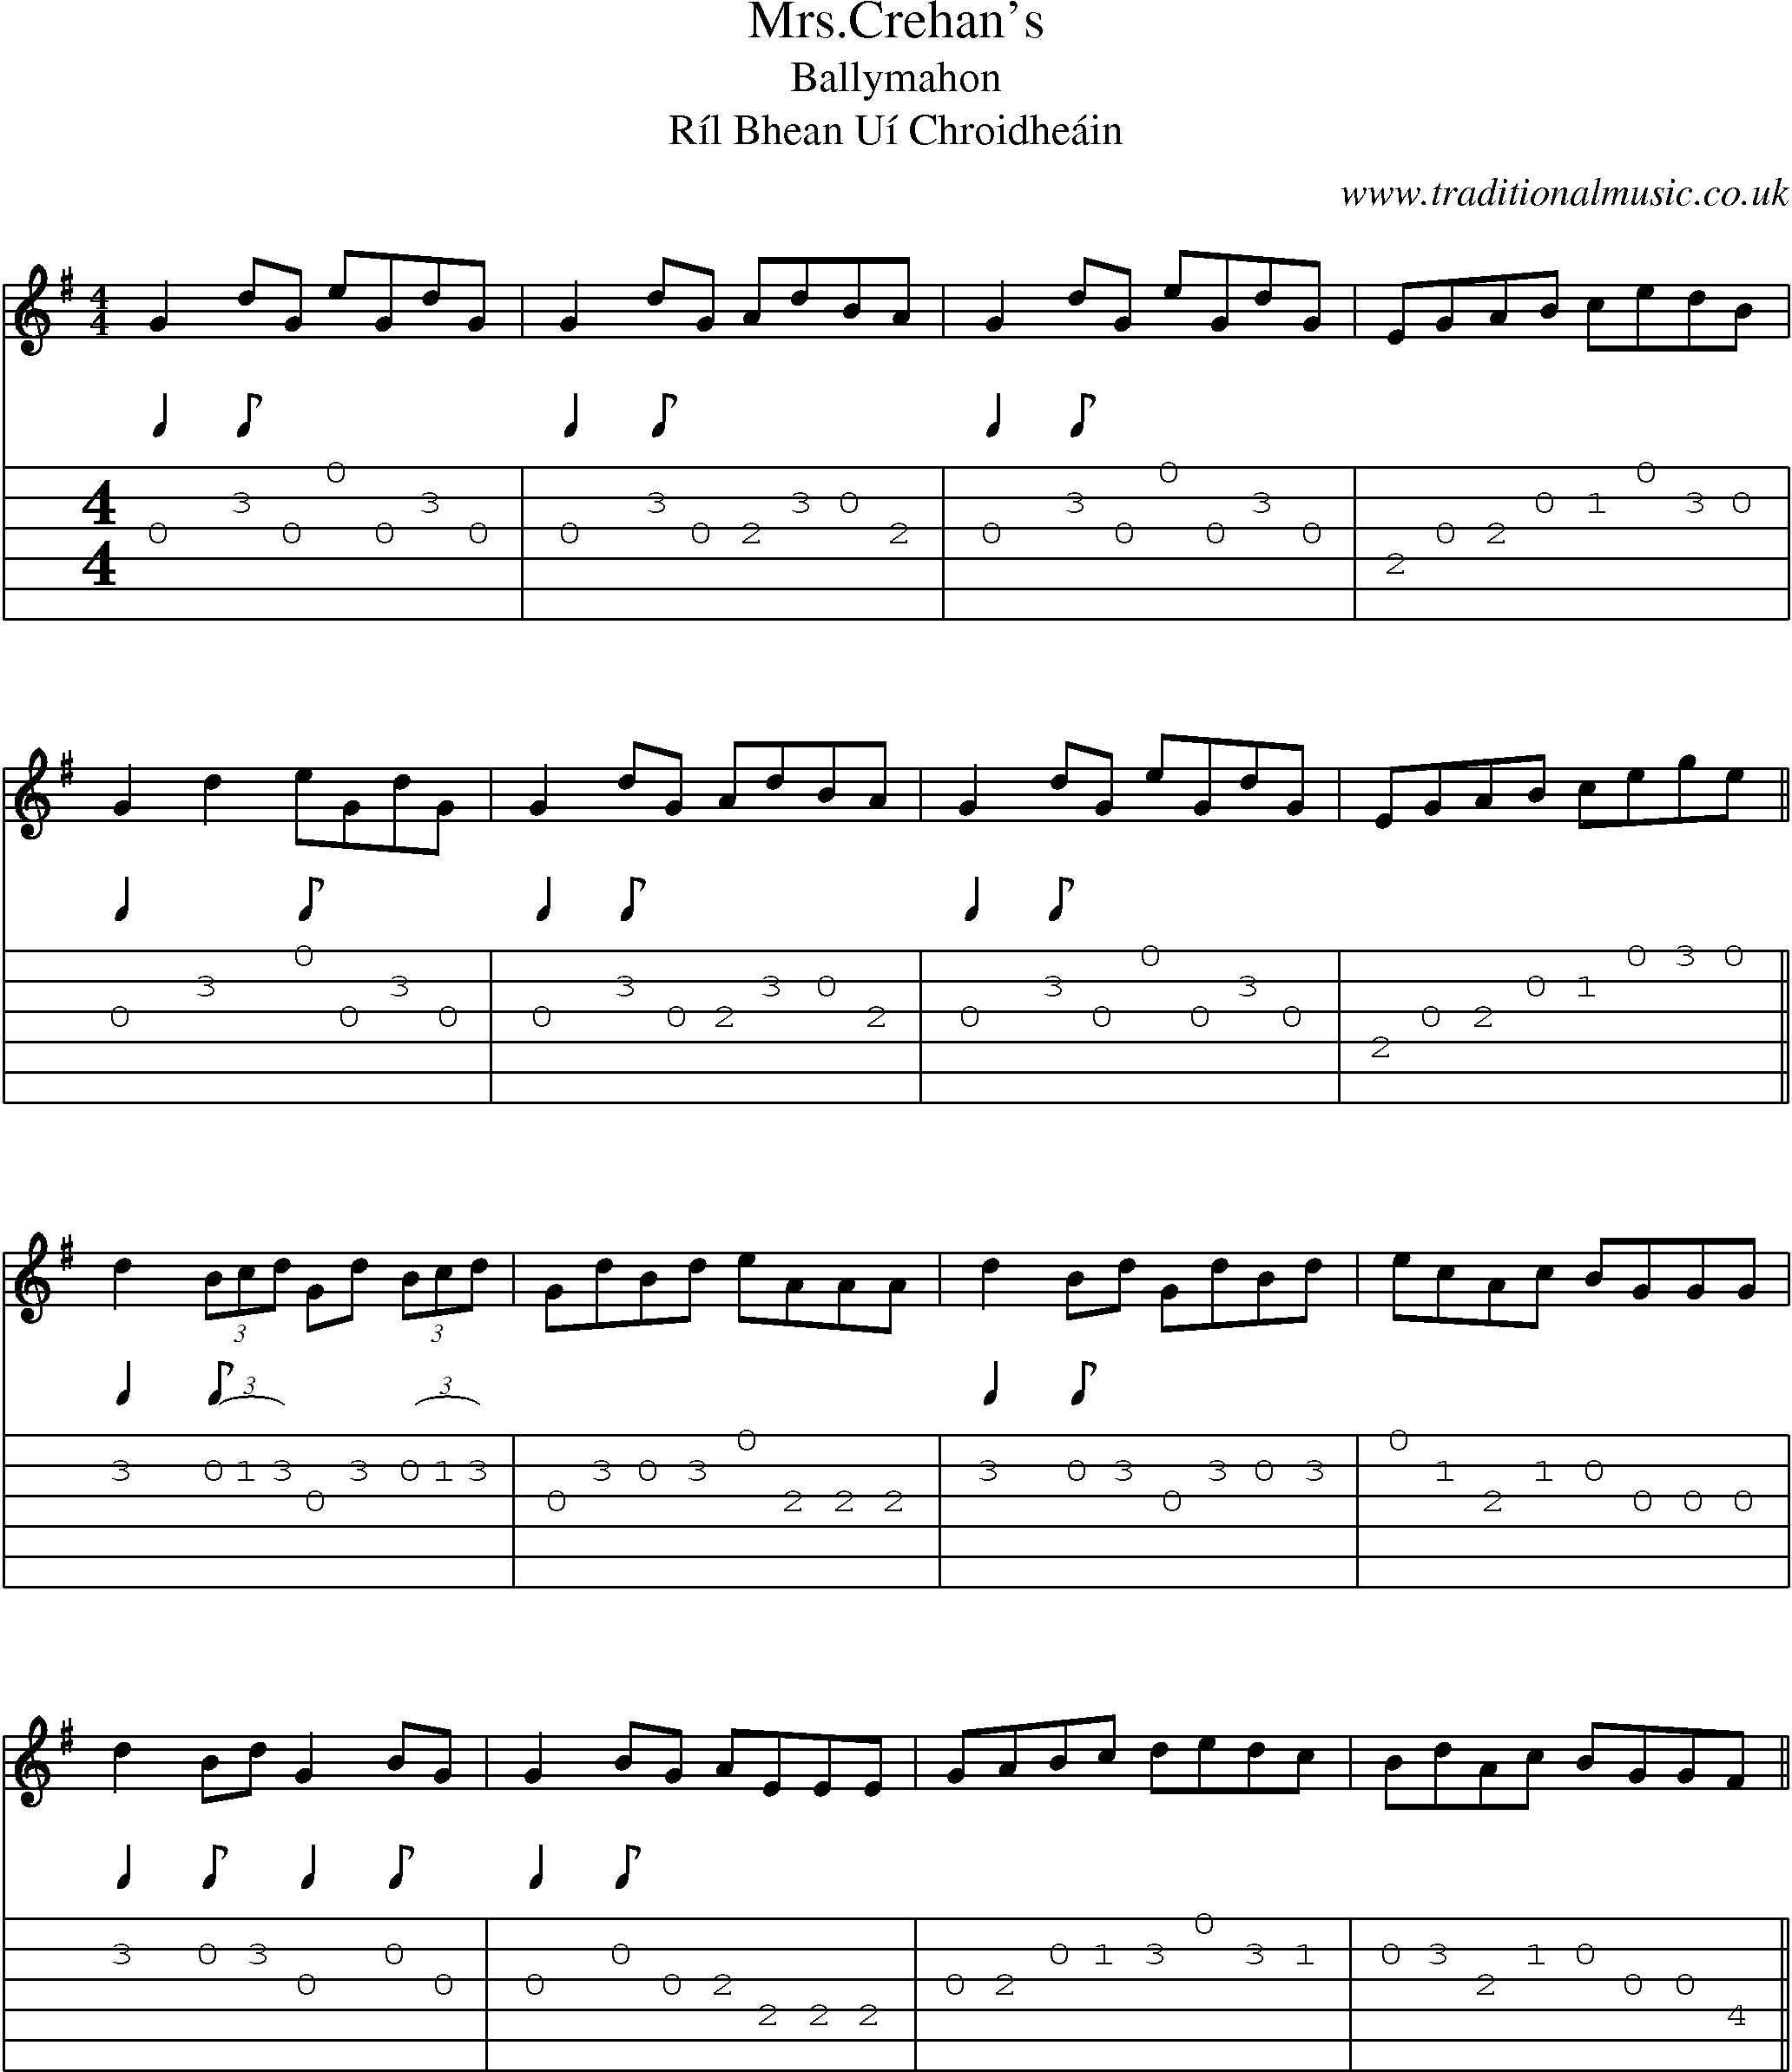 Music Score and Guitar Tabs for Mrscrehans